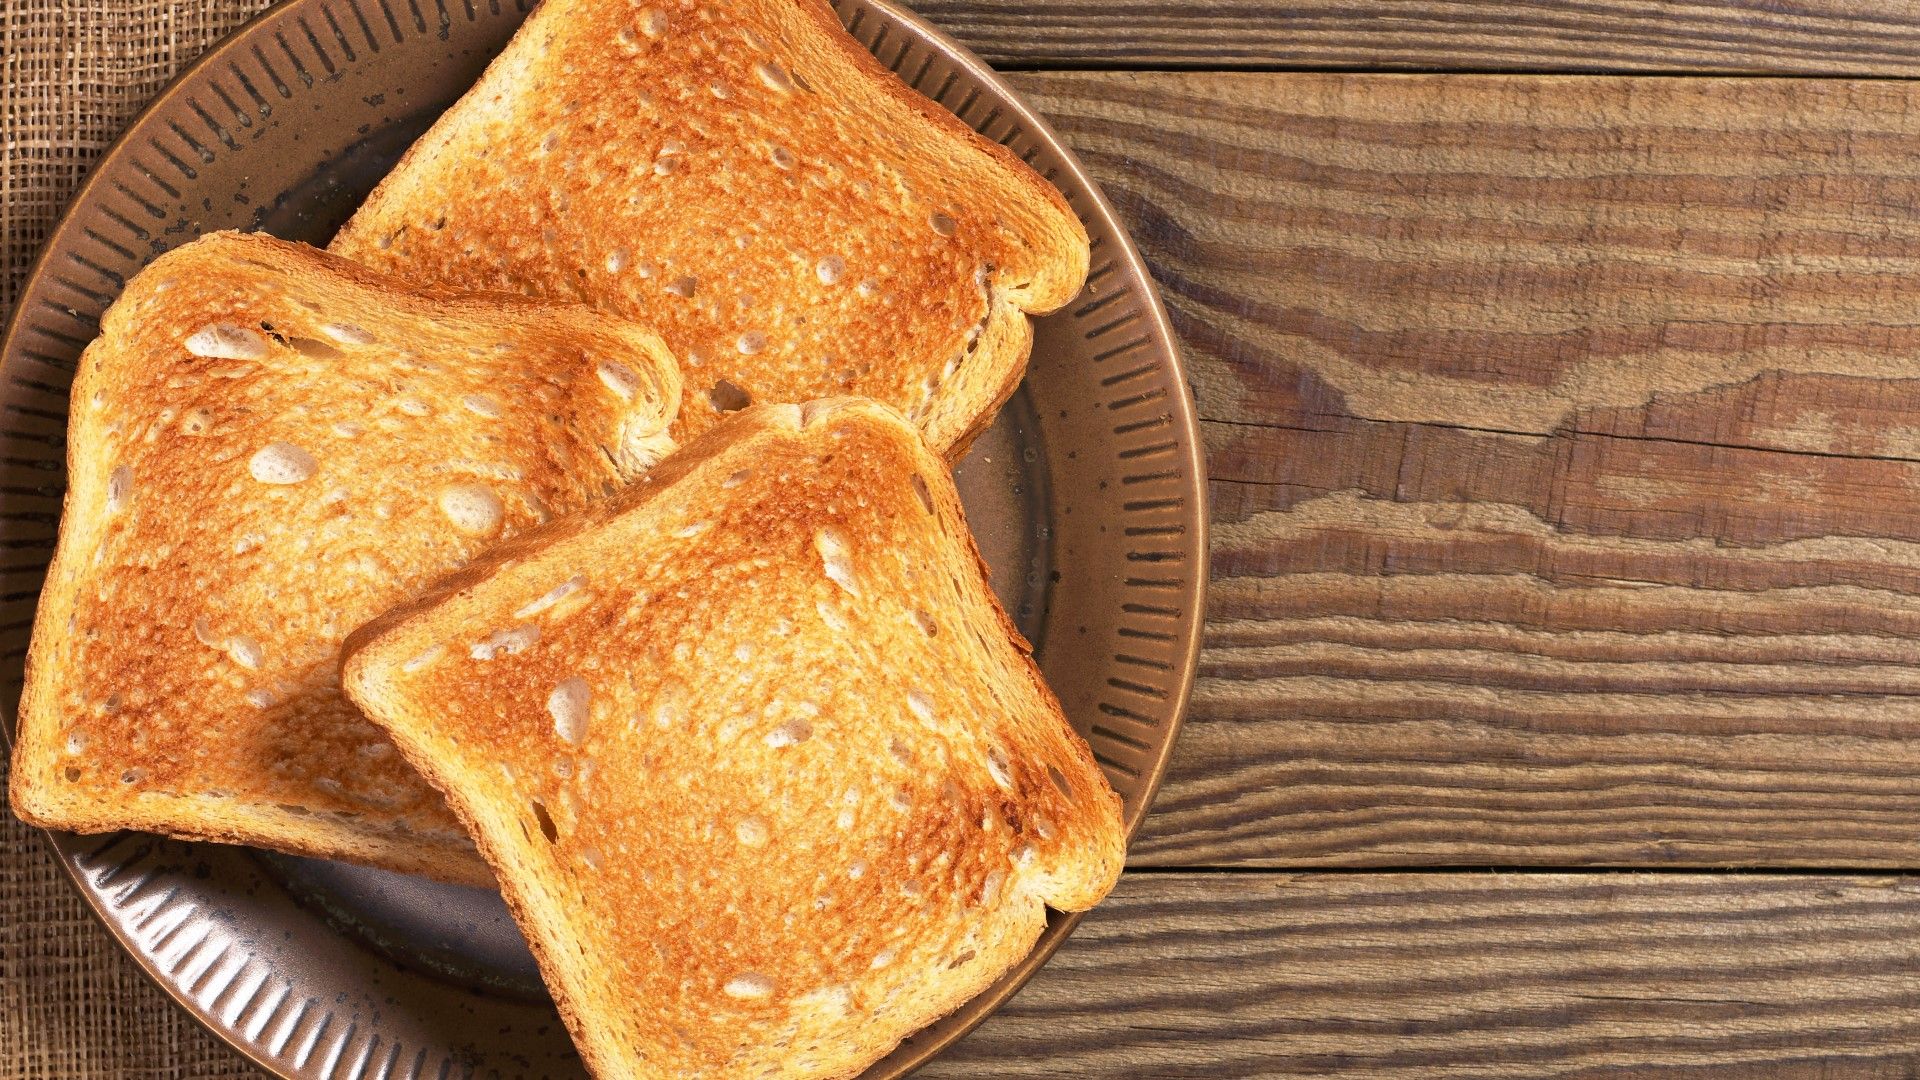 lose weight by toasting bread .wusa9.com